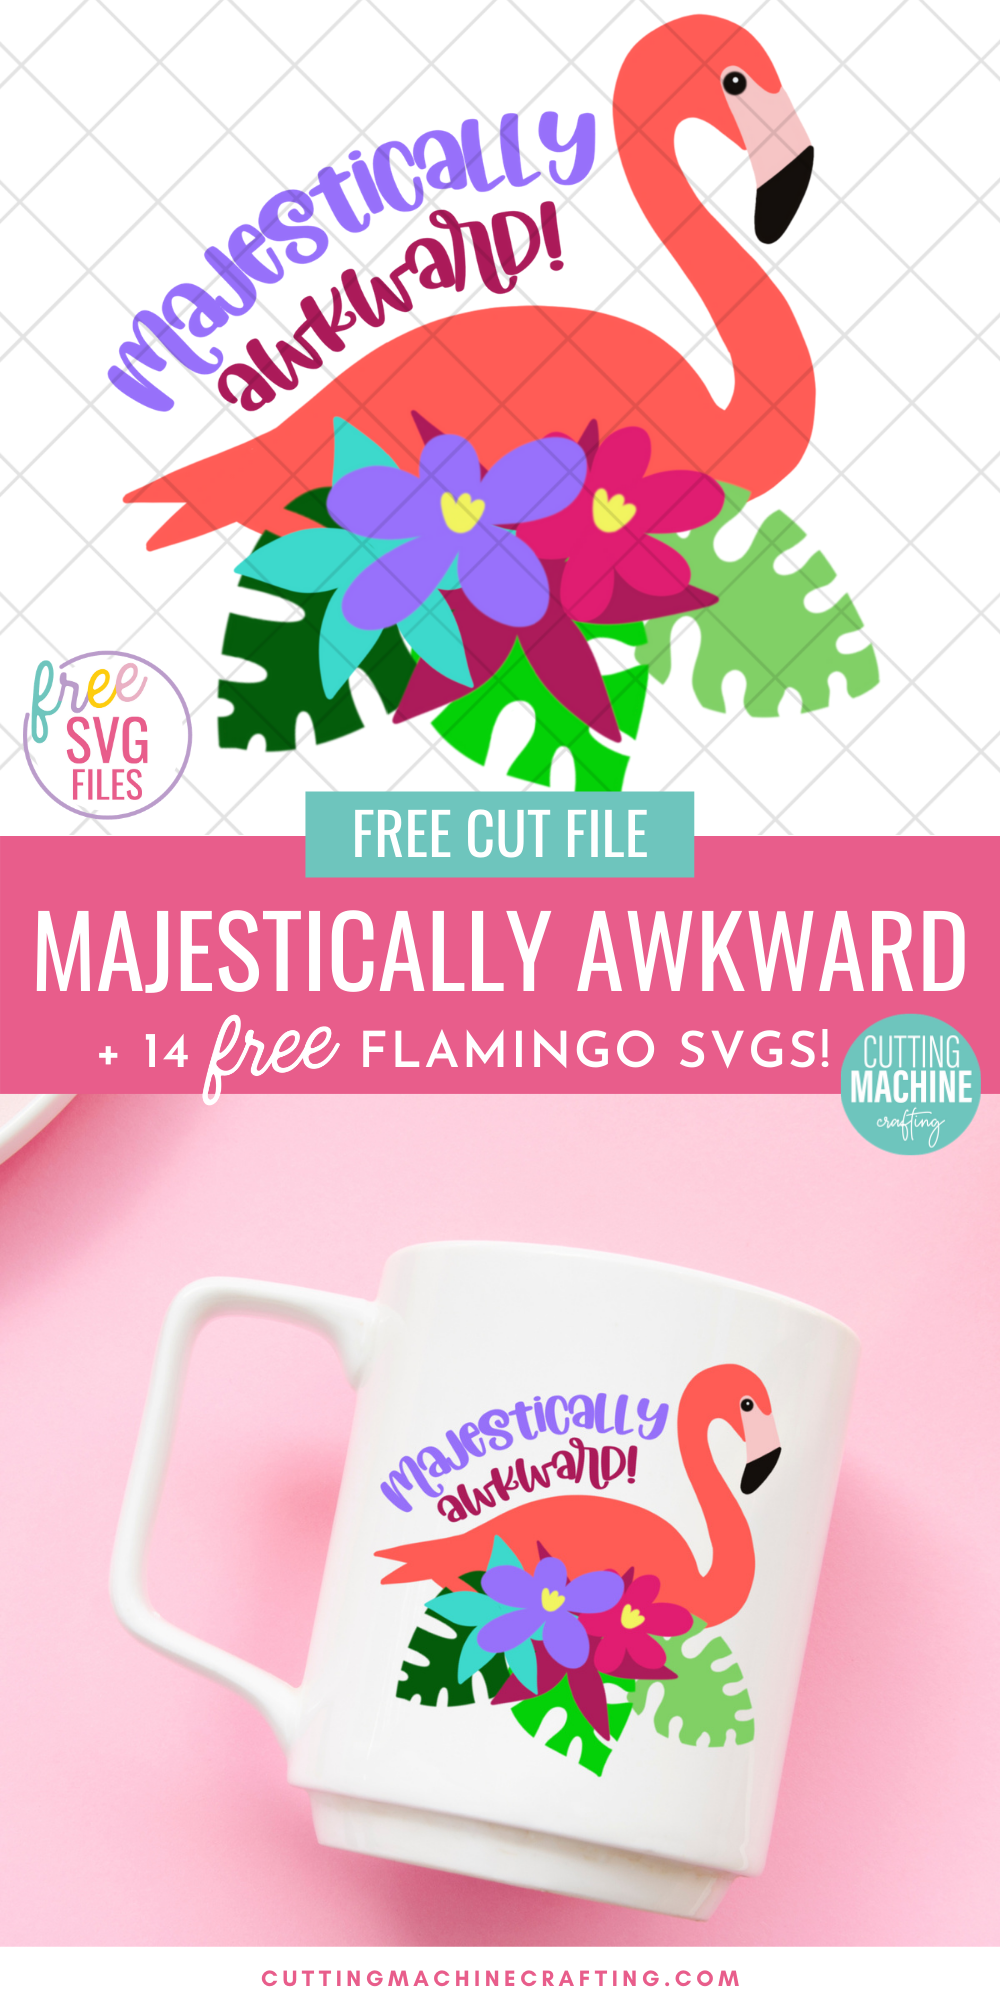 Make flamingo stickers, shirts, beach bags mugs and more with 14 free flamingo cut files! The majestically awkward SVG is so cute! Perfect for summer crafting with your Cricut, Silhouette or other electronic cutting machine! So fun for DIY party favors for tropical themed parties!